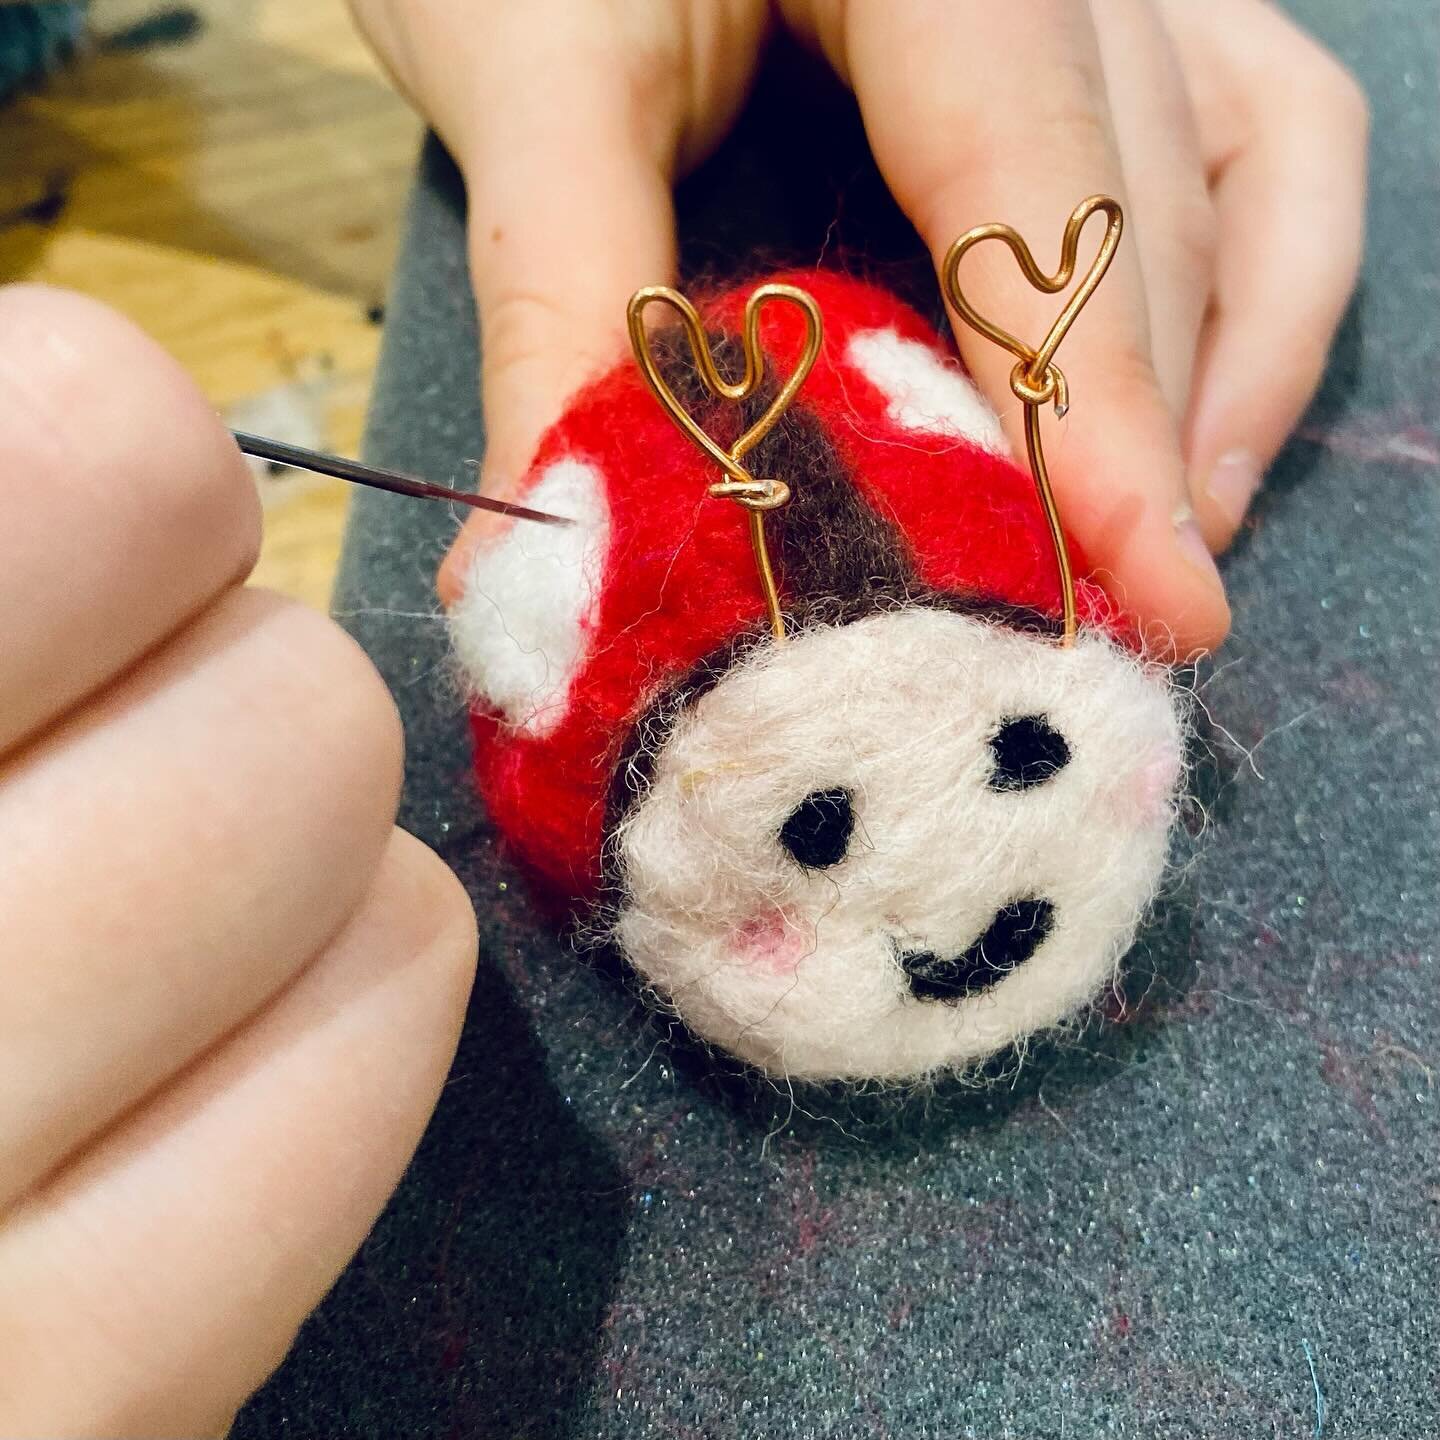 Love Bugs!!! 💖💖💖

Last week our artists felted love bugs! They are gorgeous and I am in love!! 😍Well done everyone xx
.
.
.
.
.
#felting #bugs #valentine #animals #sculpture #3D #artschool #artclass #childrensart #cheshire #homeed